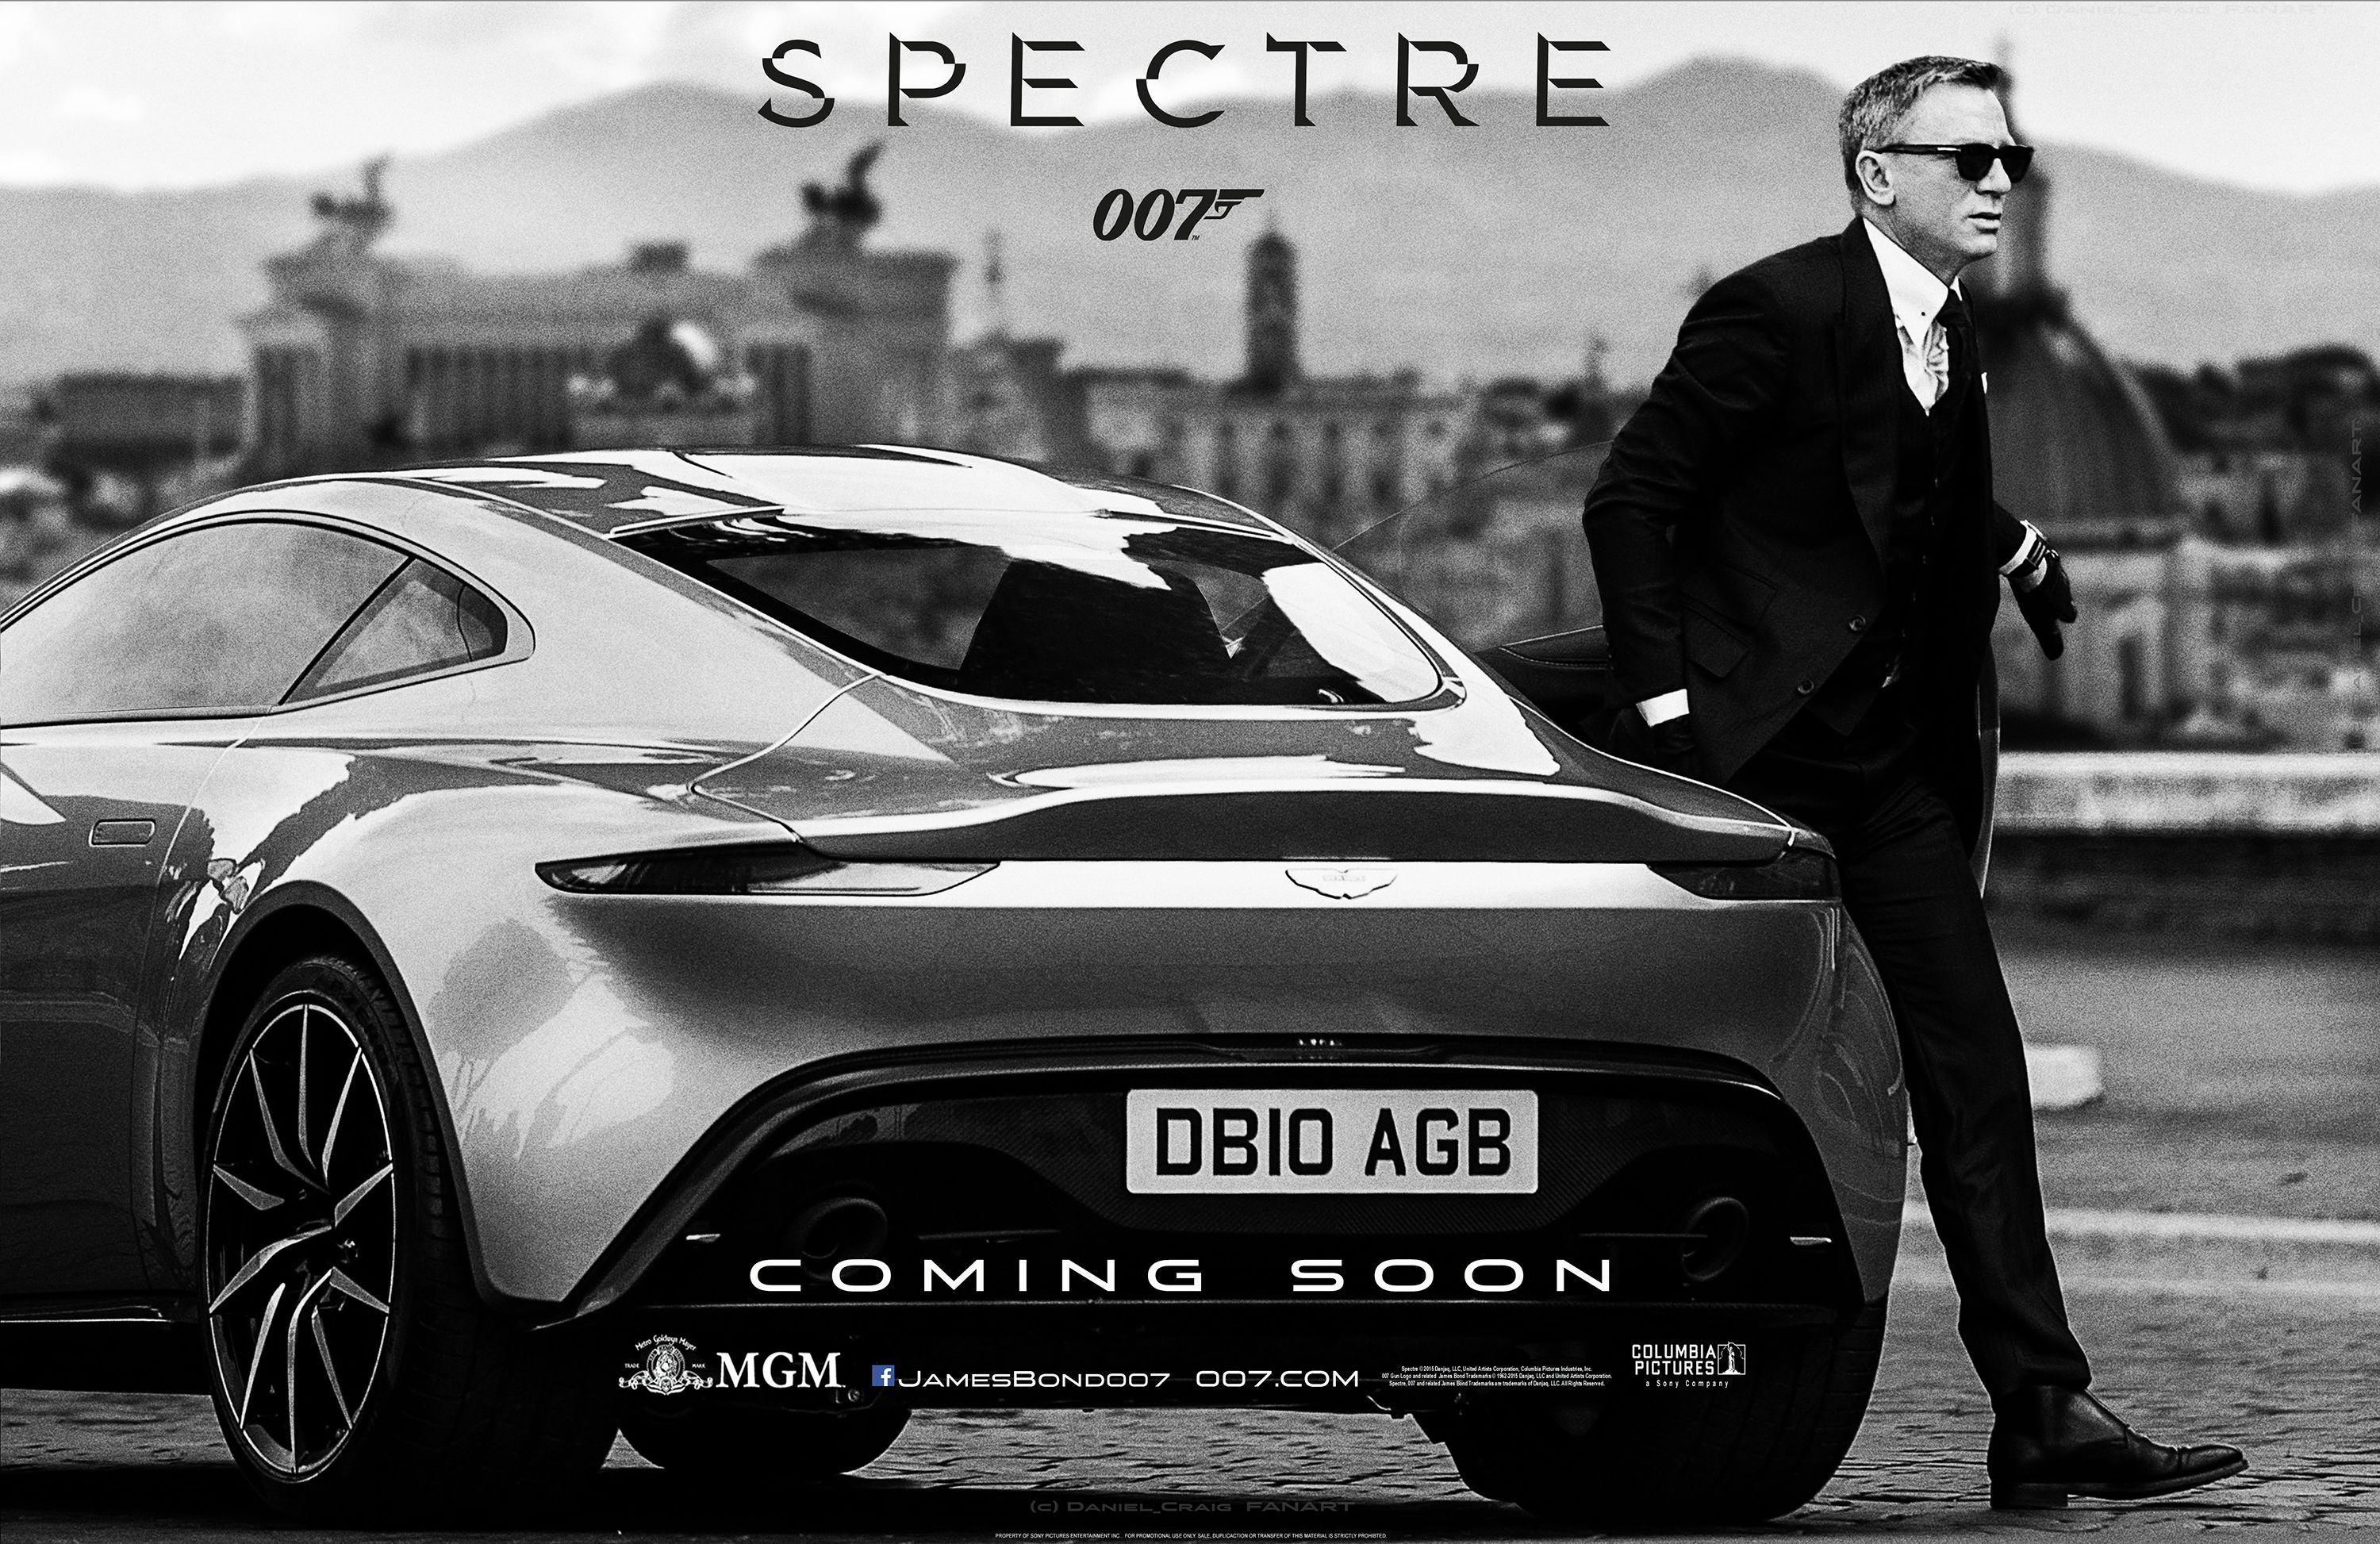 Spectre download the new version for iphone